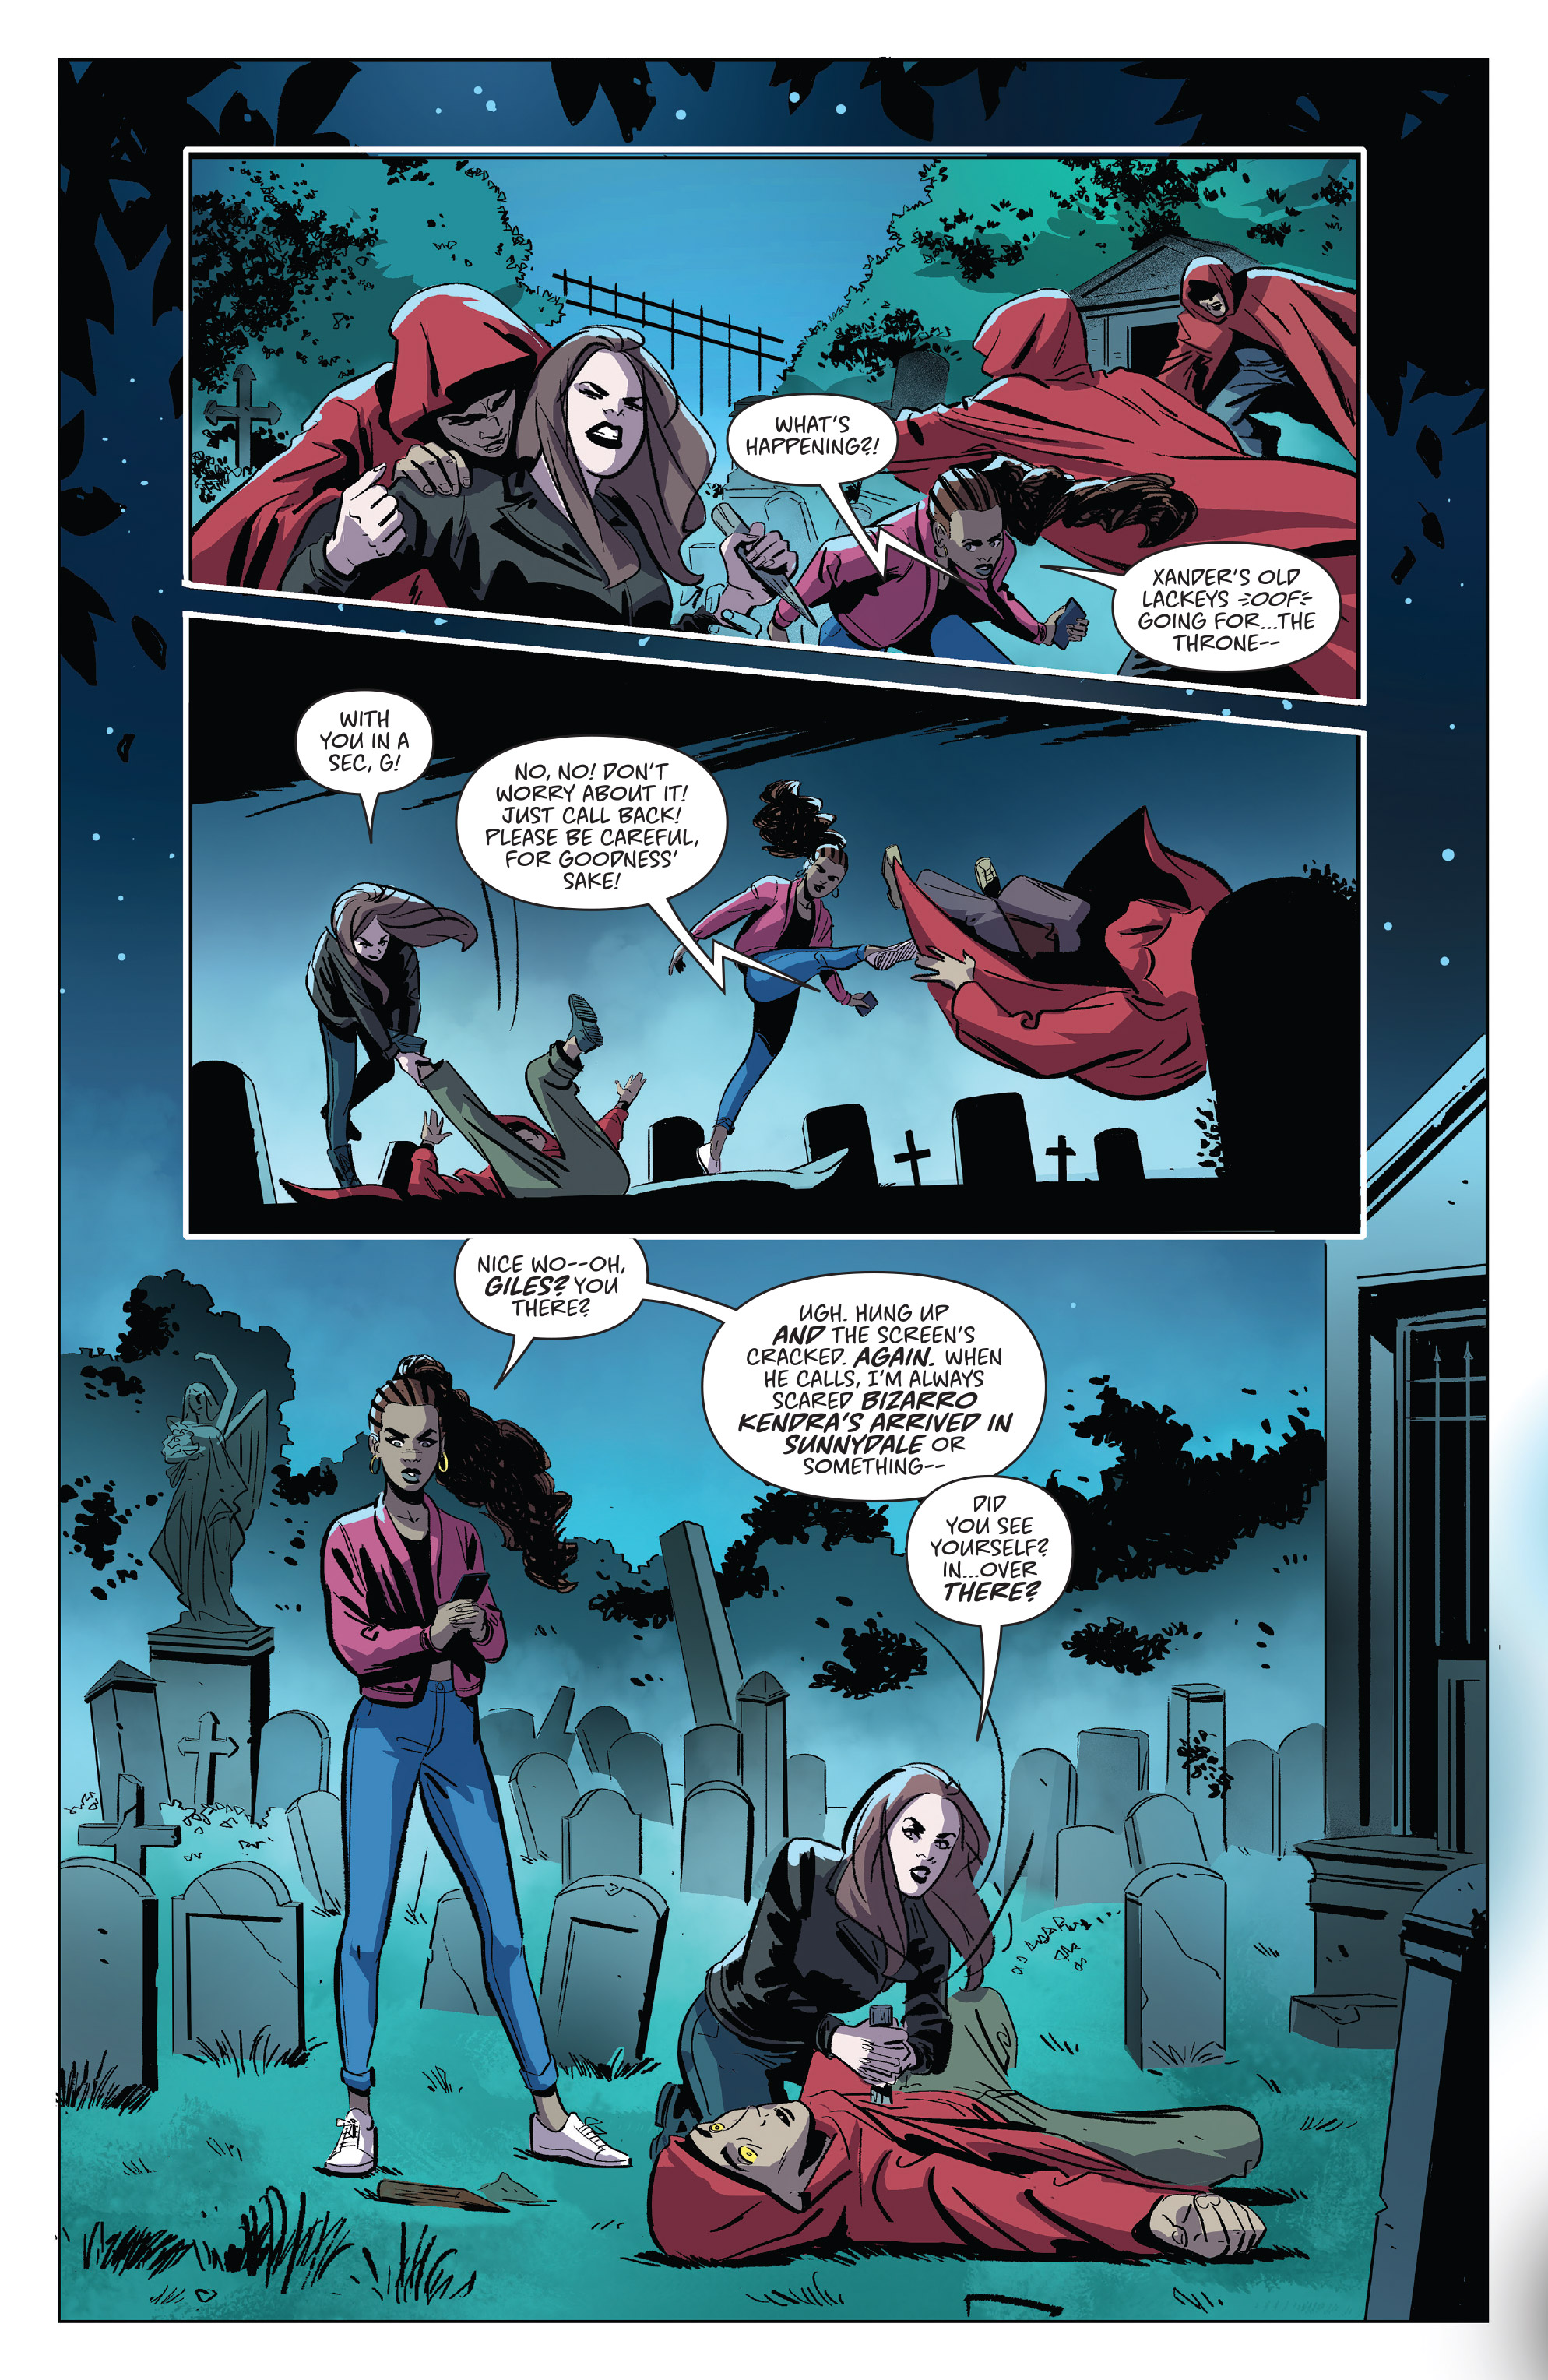 Buffy the Vampire Slayer (2019-): Chapter 26 - Page 4